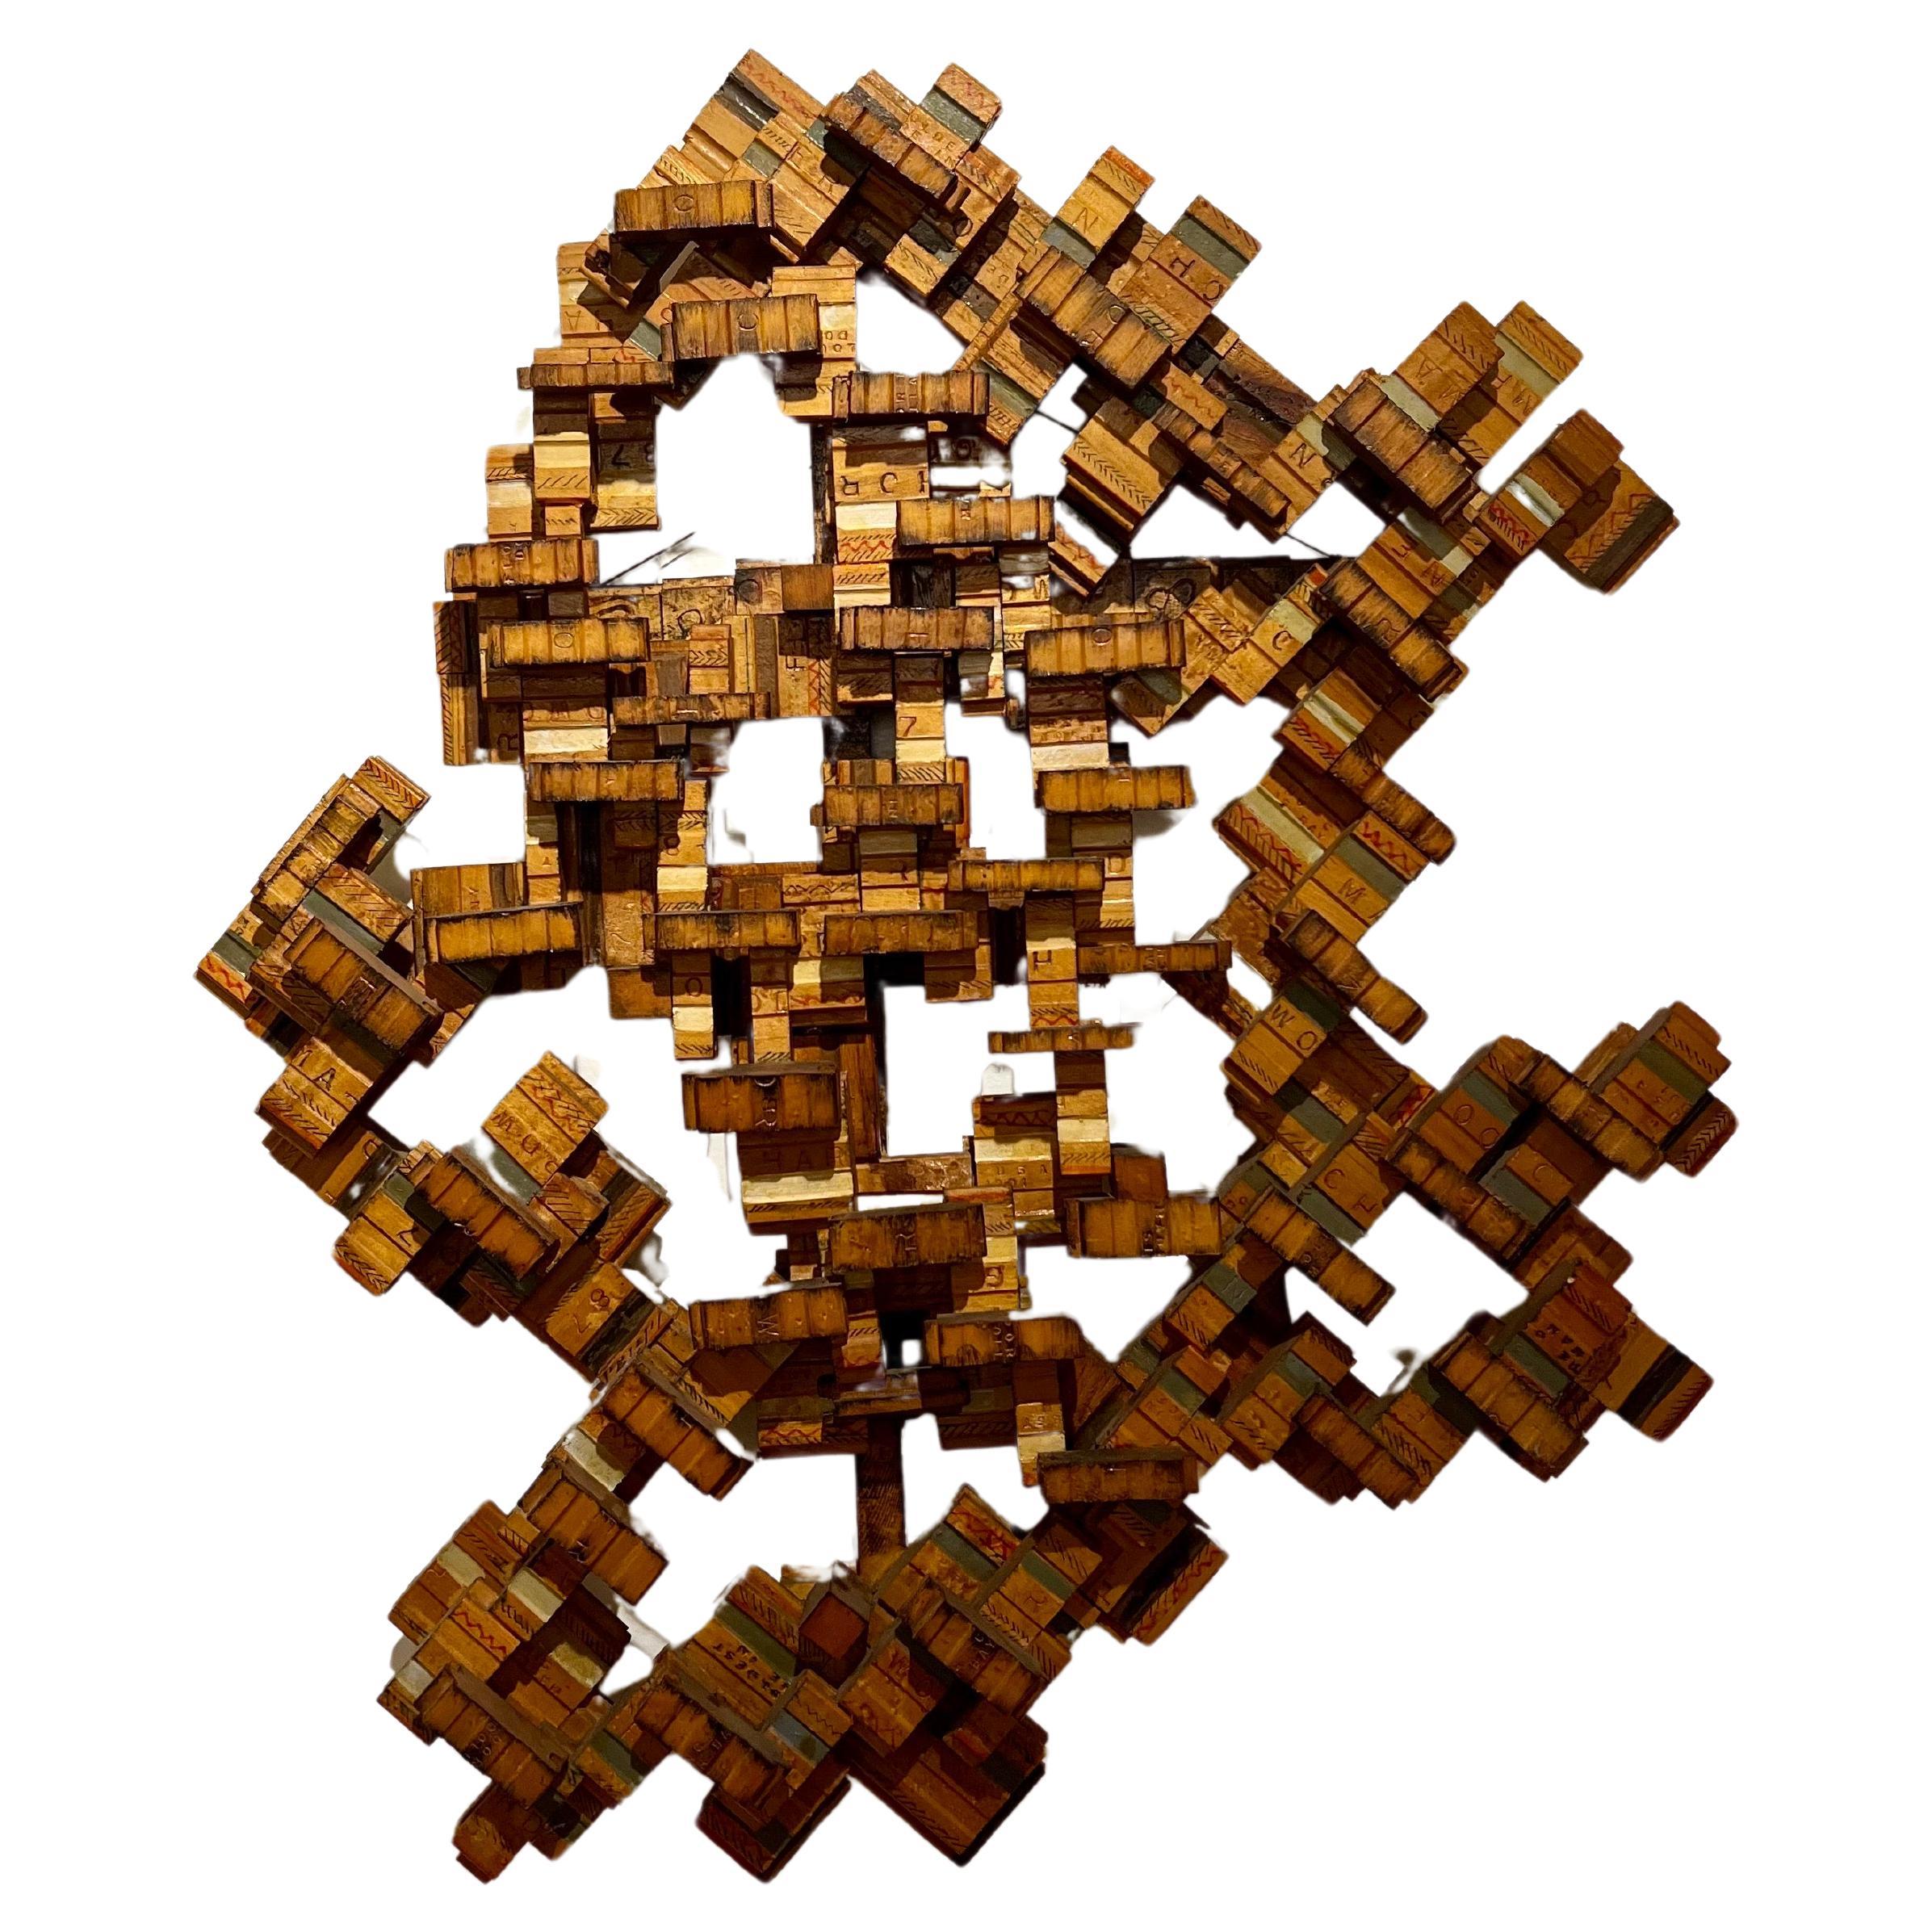 One-of-a-kind wood handcrafted wall art sculpture Fragmented pieces of wood put together in an abstract freeform shape, circa 1970's.